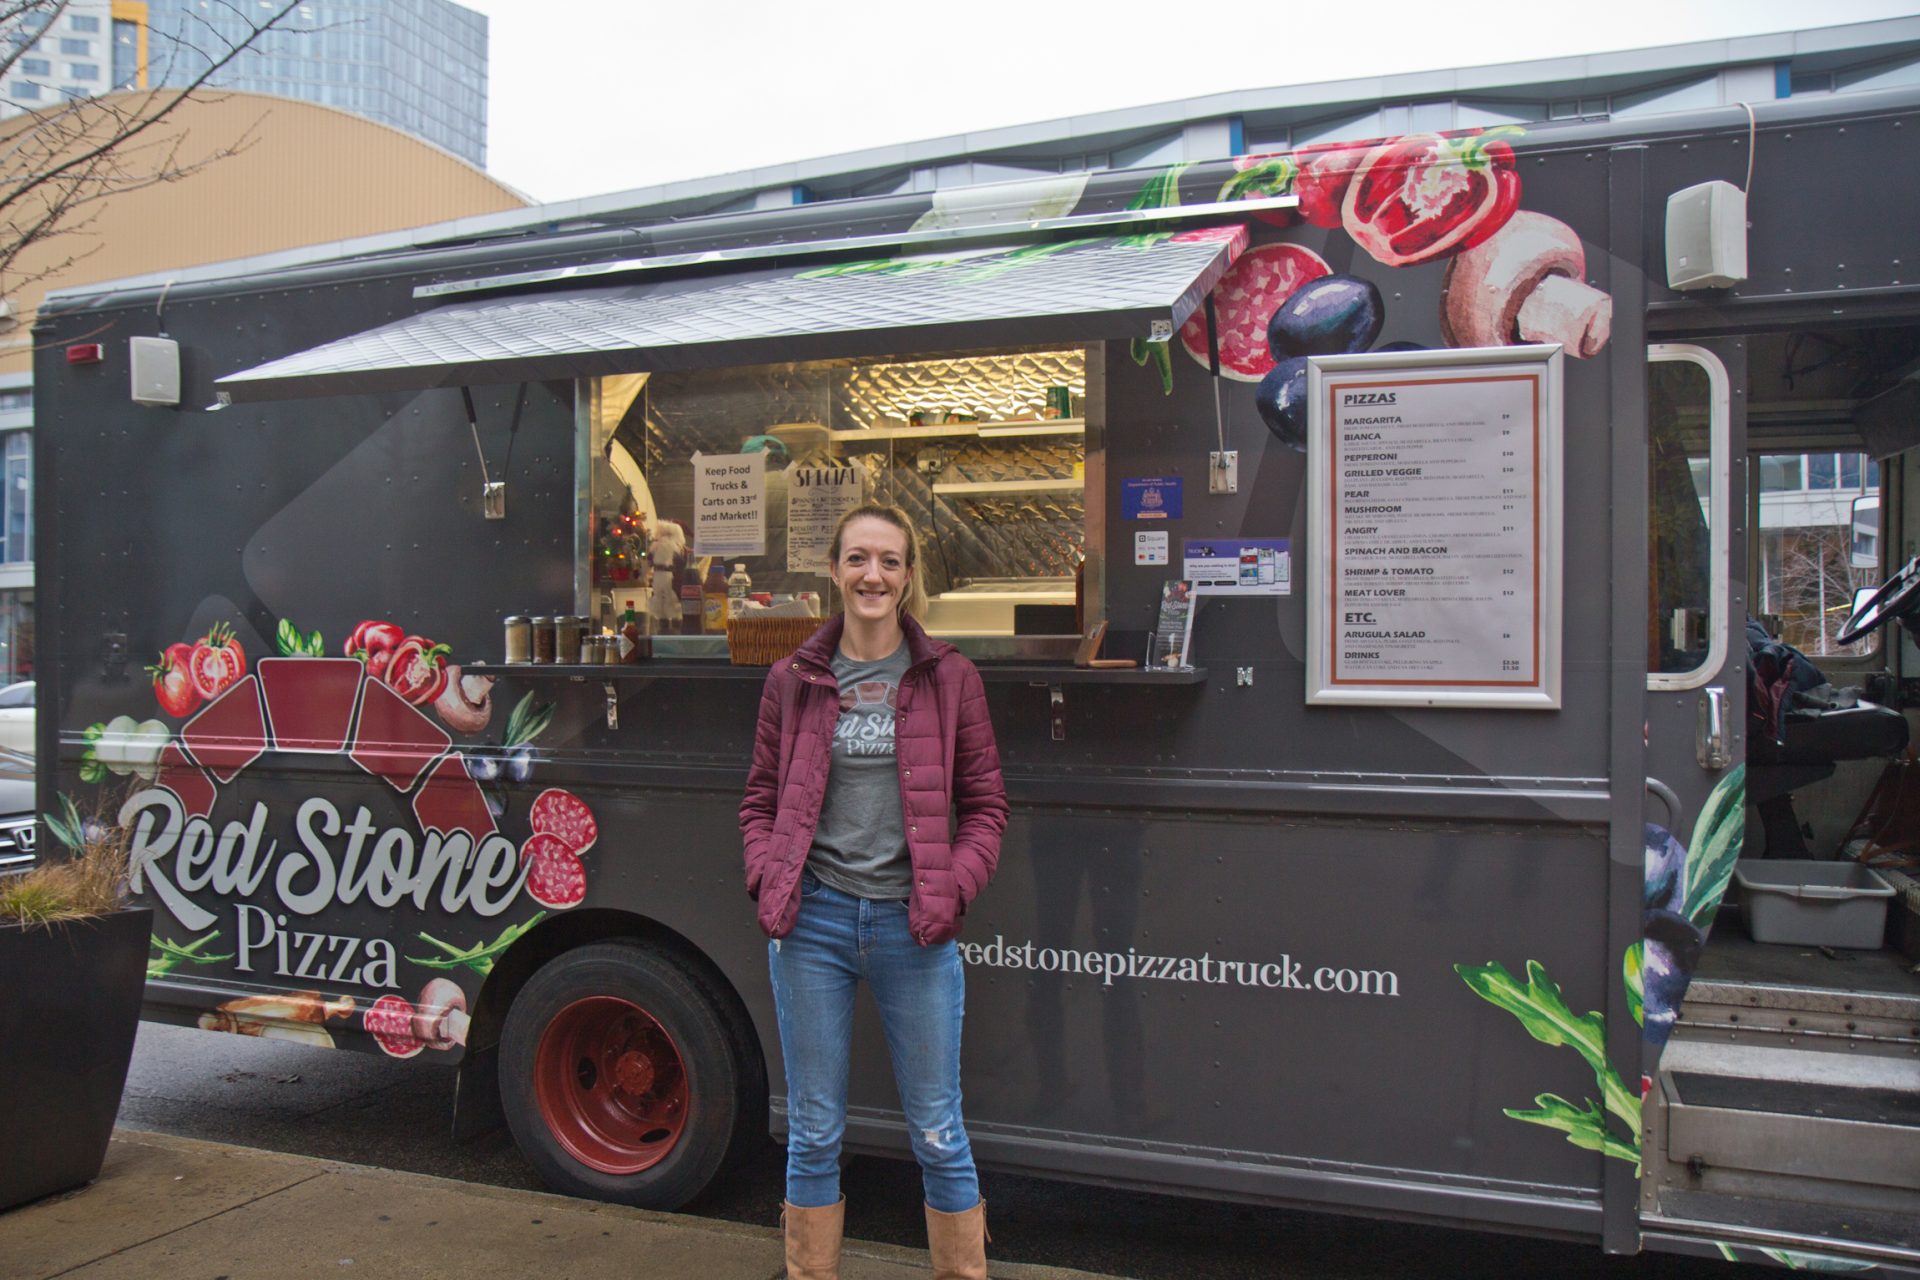 Jessica Caldwell is the owner of the Red Stone Pizza food truck.